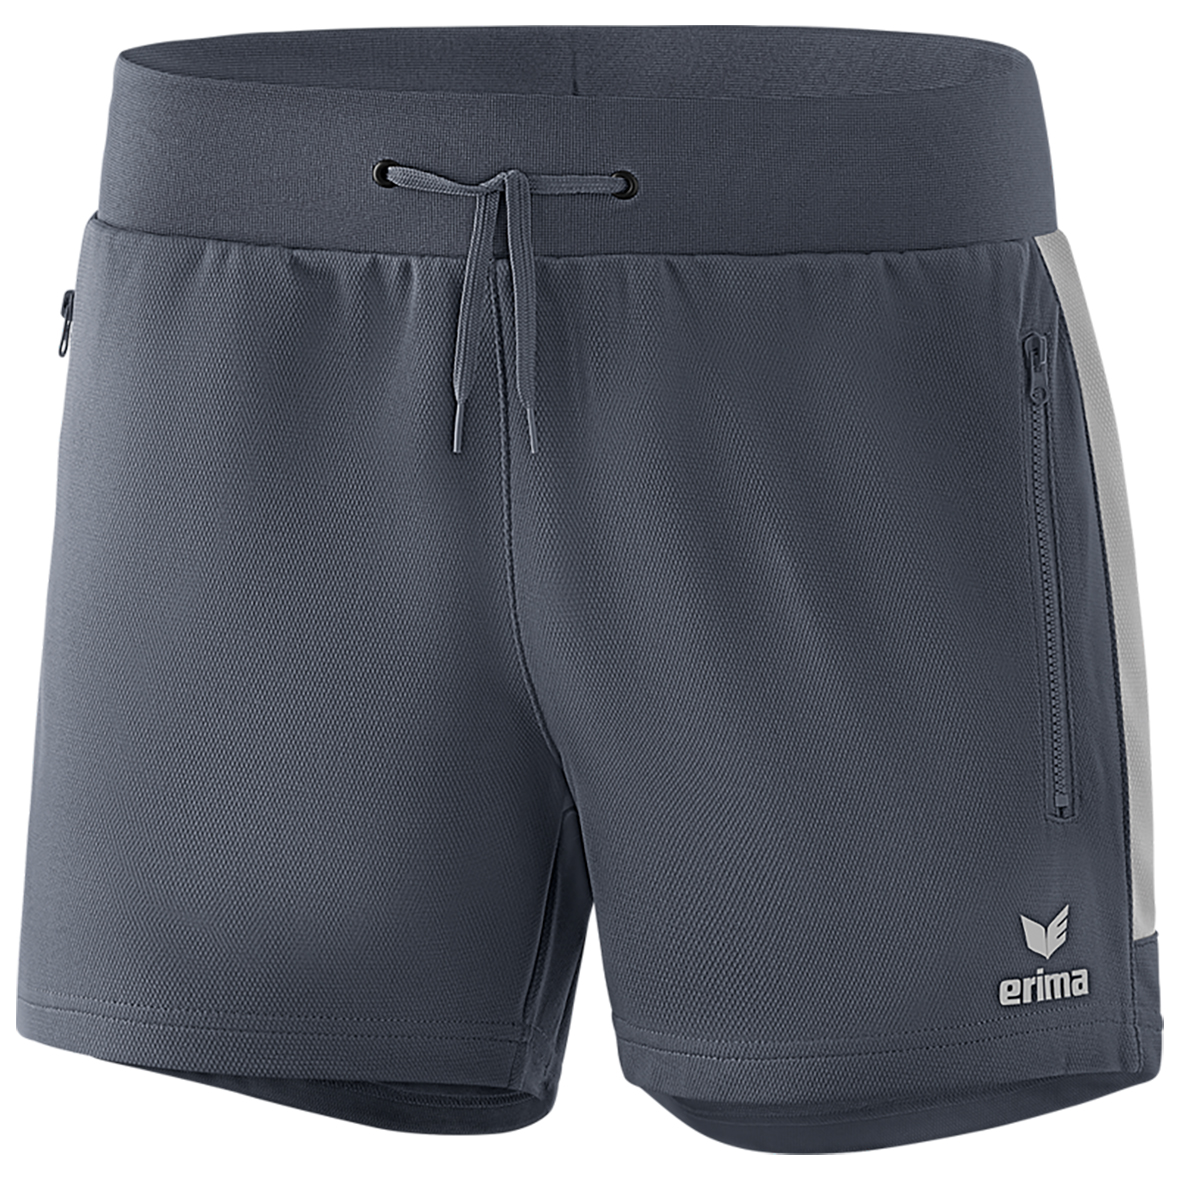 ERIMA SQUAD WORKER SHORTS, GRIS PIZARRA-GRIS PLATA MUJER.